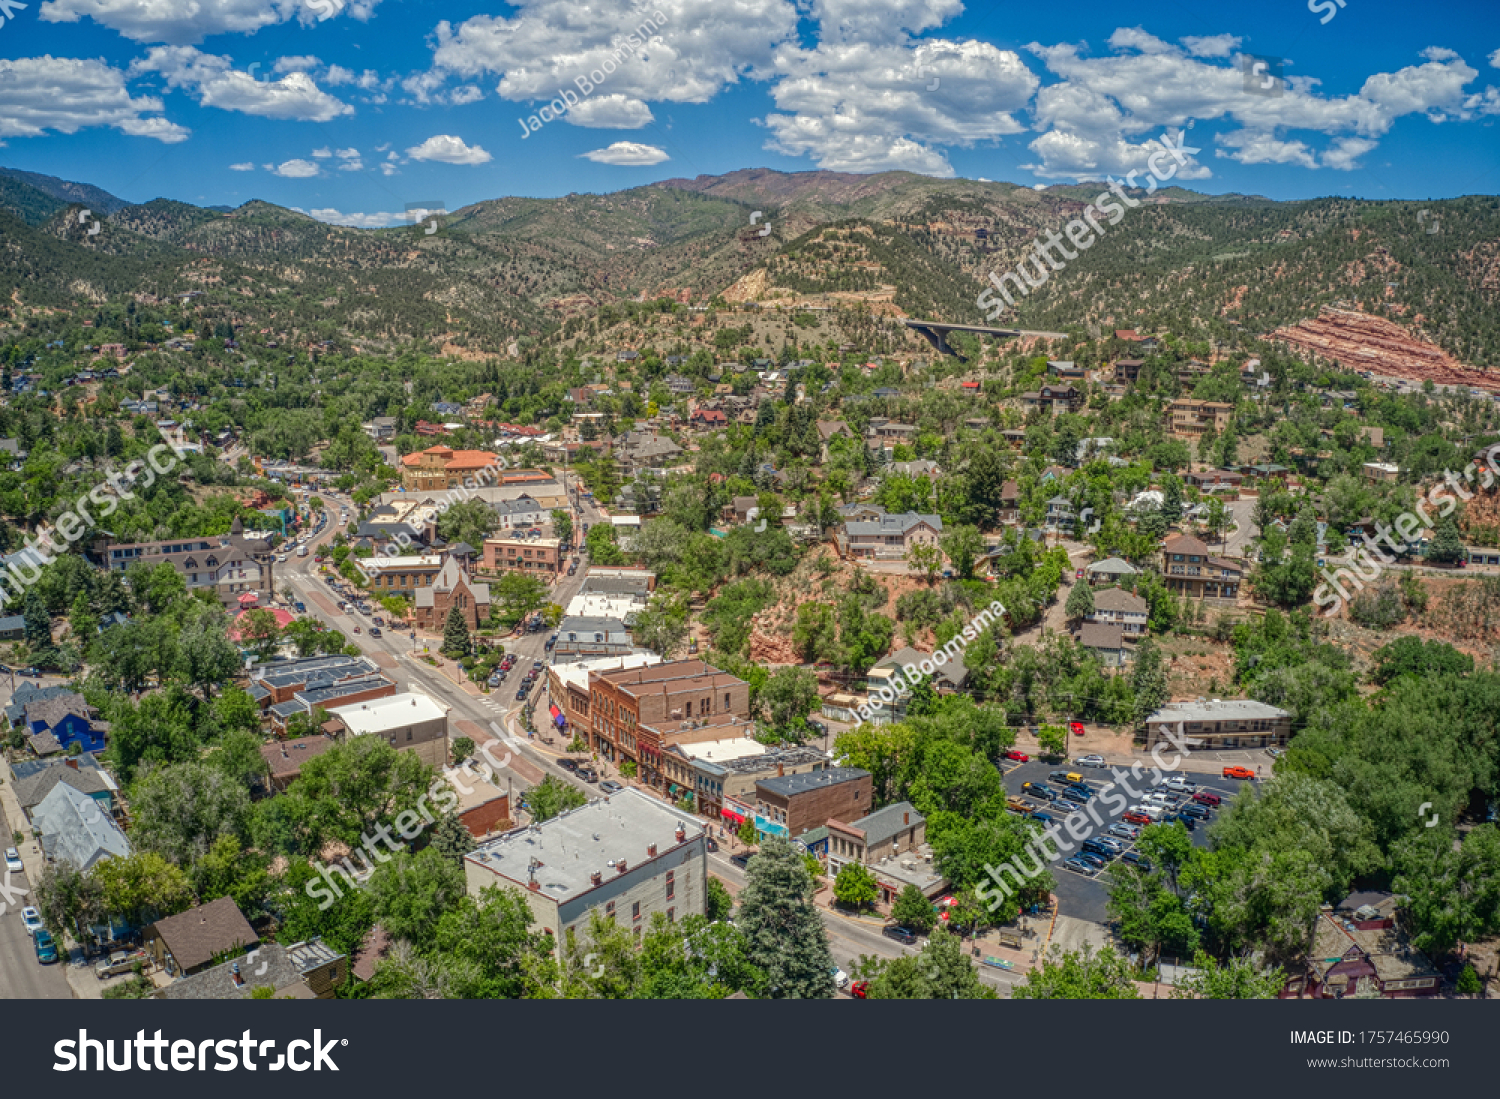 Aerial View of Downtown Manitou SpringsAerial View of Downtown Manitou Springs #1757465990